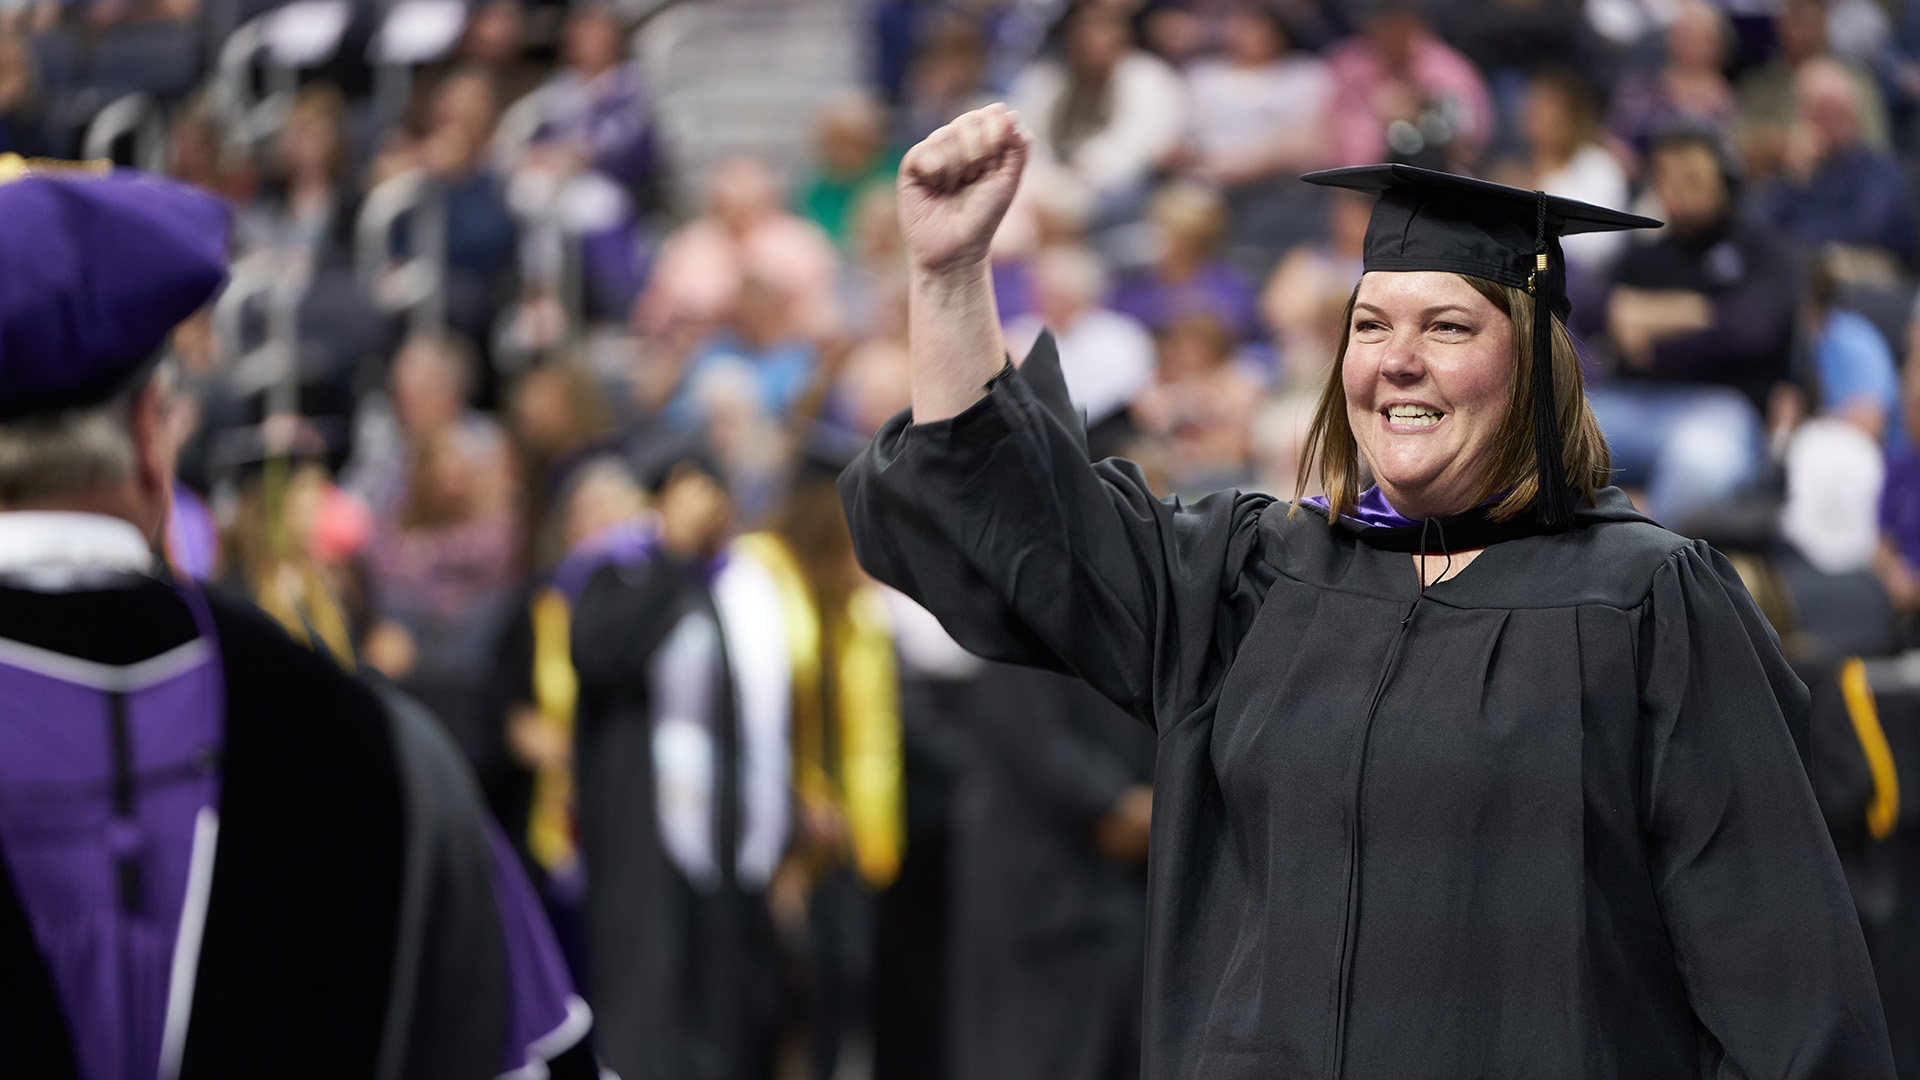 UE adult graduate with hand up at commencement